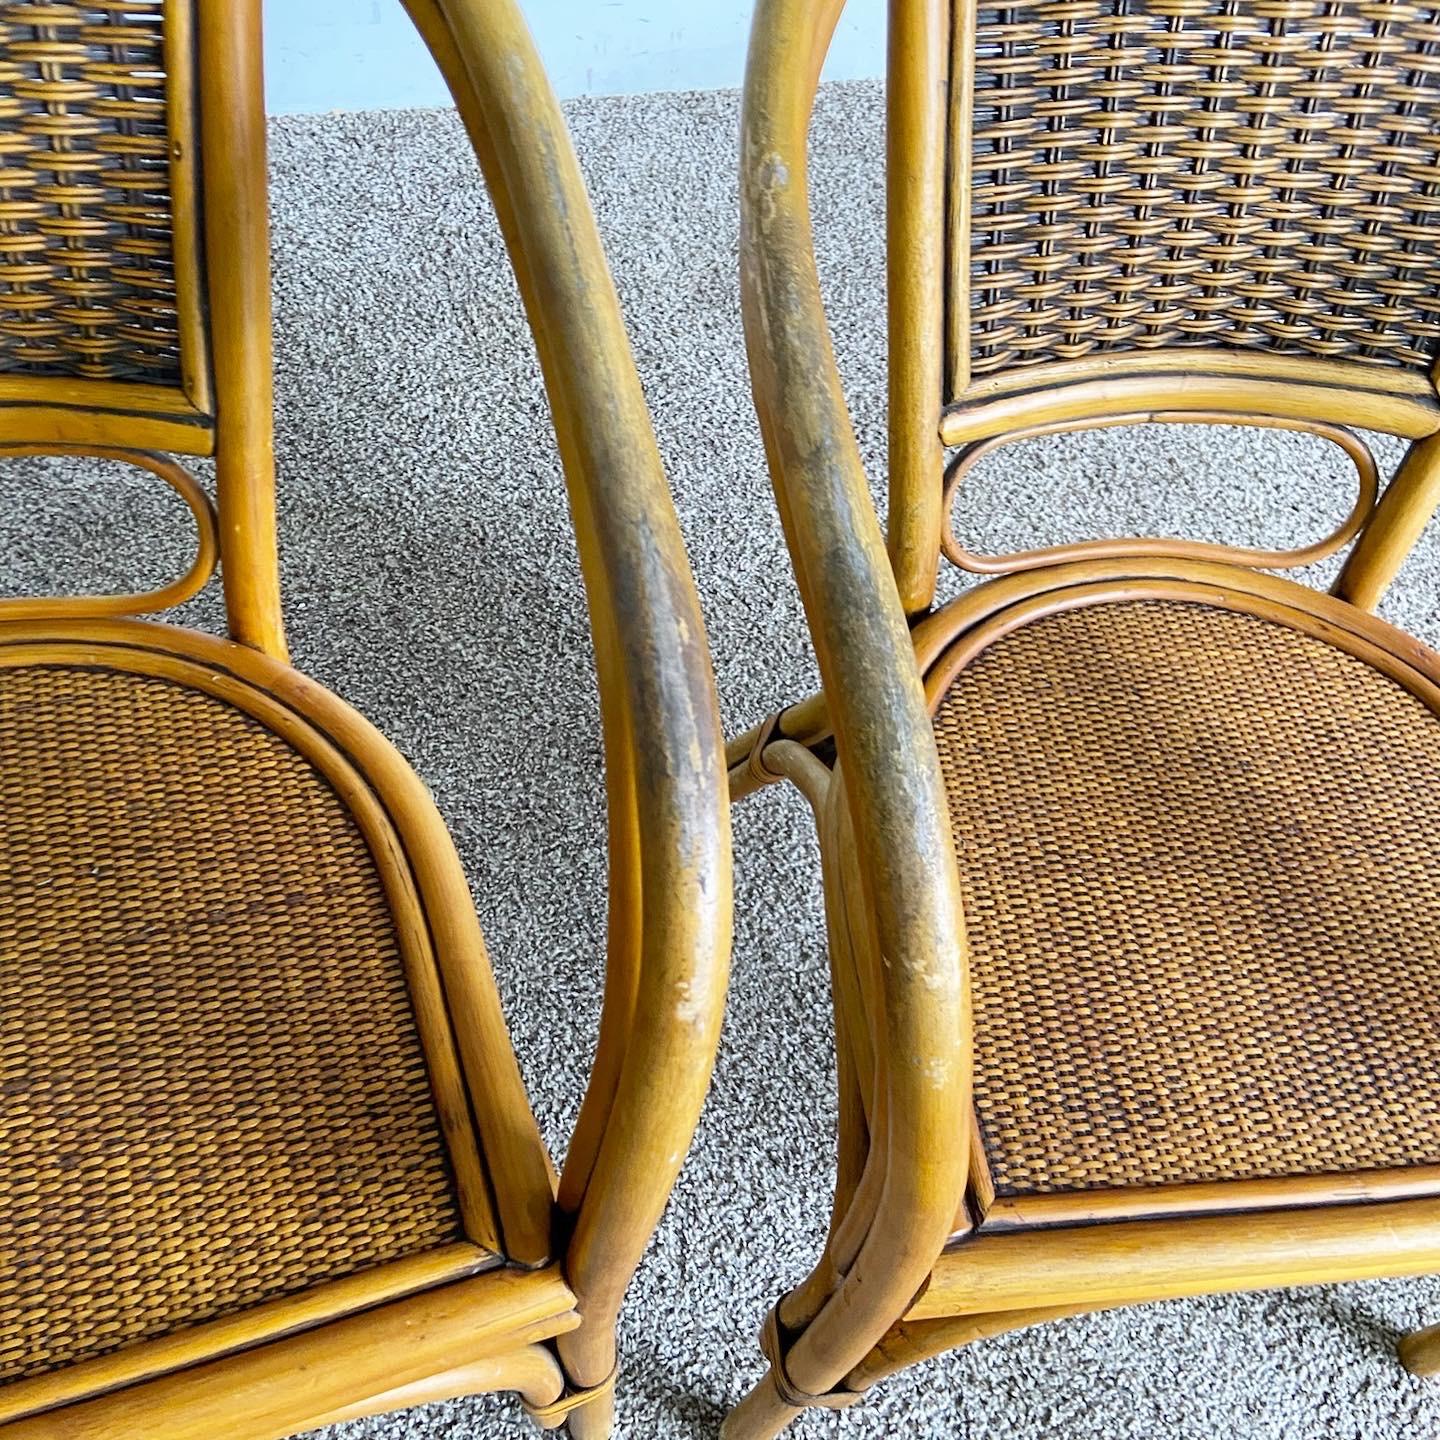 Boho Chic Bamboo Rattan Dining Chairs – Set of 4 In Good Condition For Sale In Delray Beach, FL